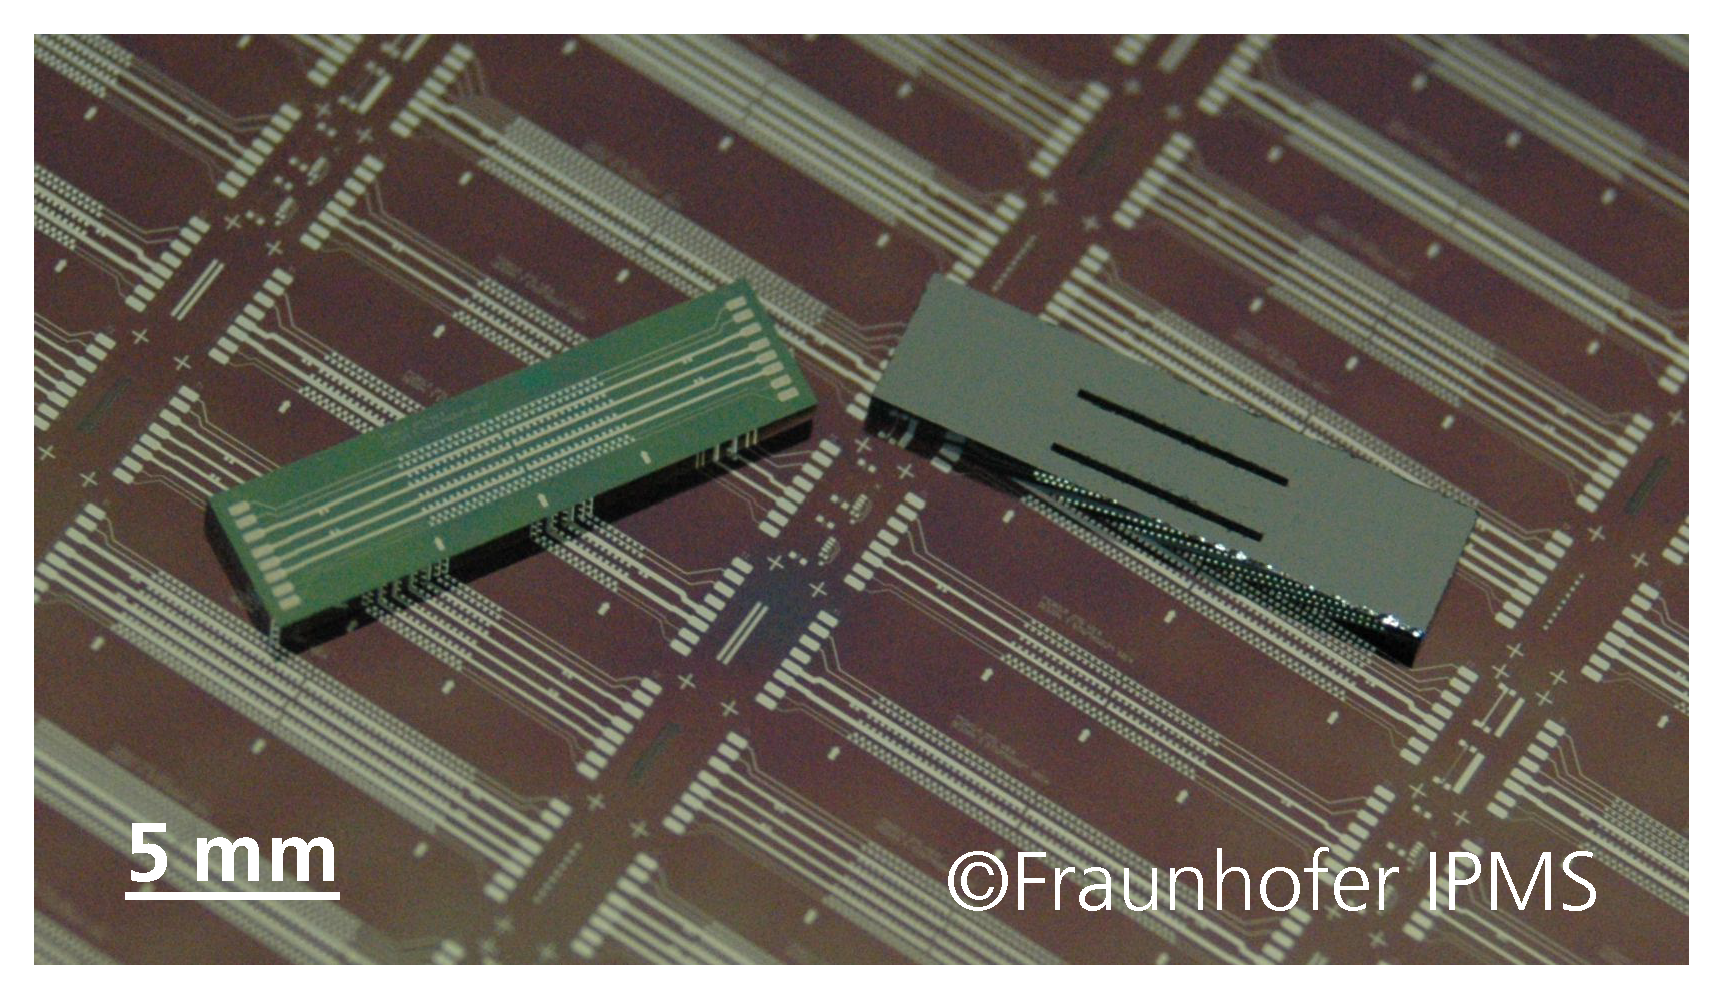 The core of the miniaturized ion mobility spectrometer to be developed is the novel FAIMS chip with a dimension of approx. 5 mm by 15 mm.